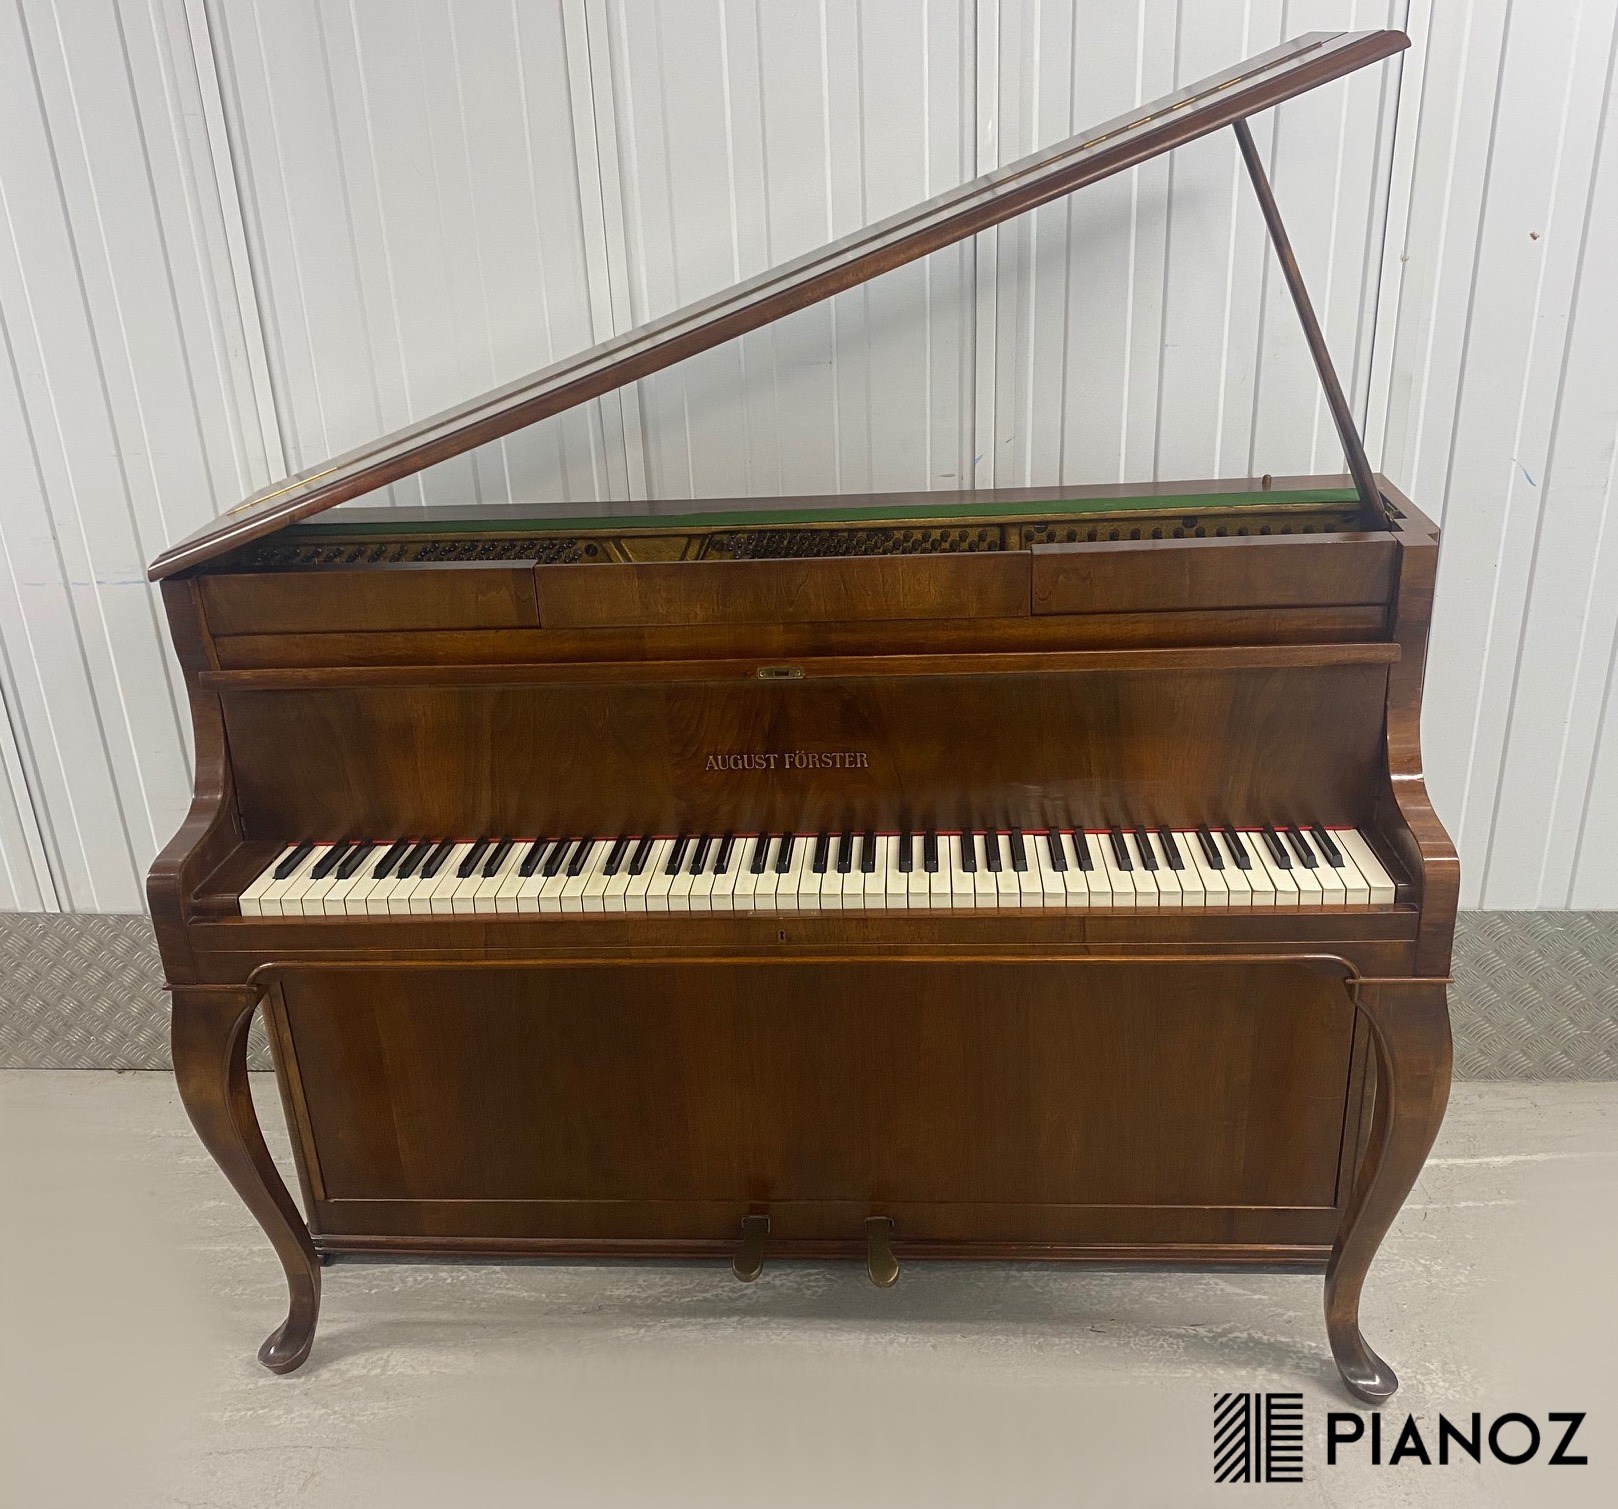 August Forster Spinet Upright Piano piano for sale in UK